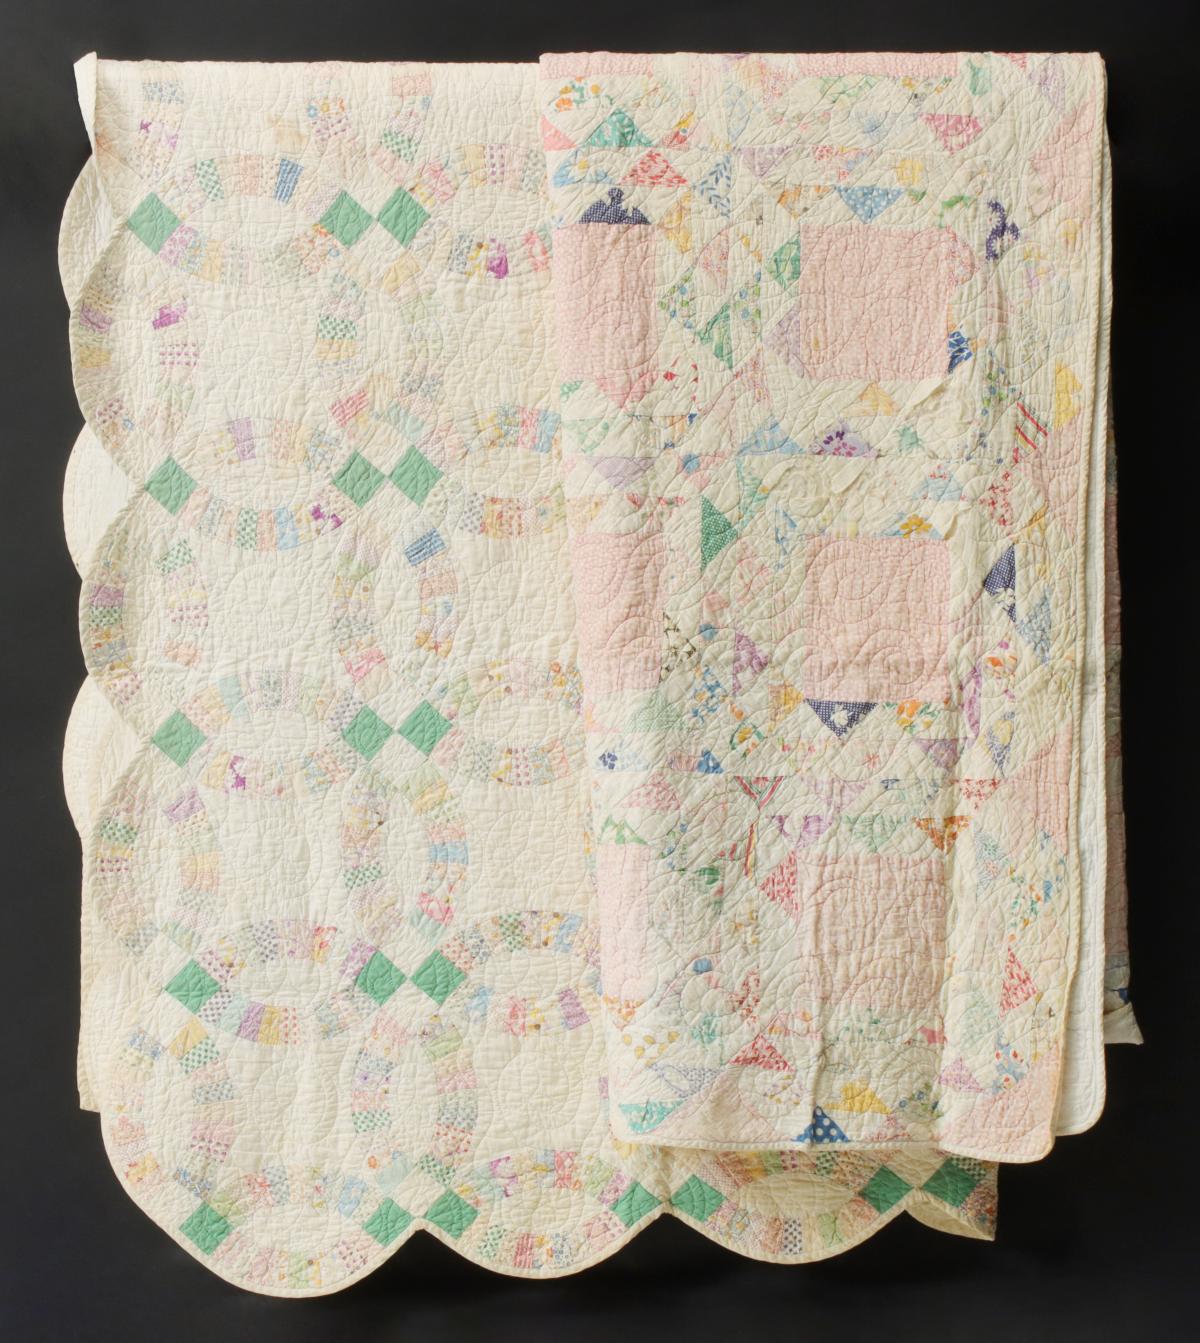 'DOUBLE WEDDING RING' AND 'FLYING GEESE' QUILTS